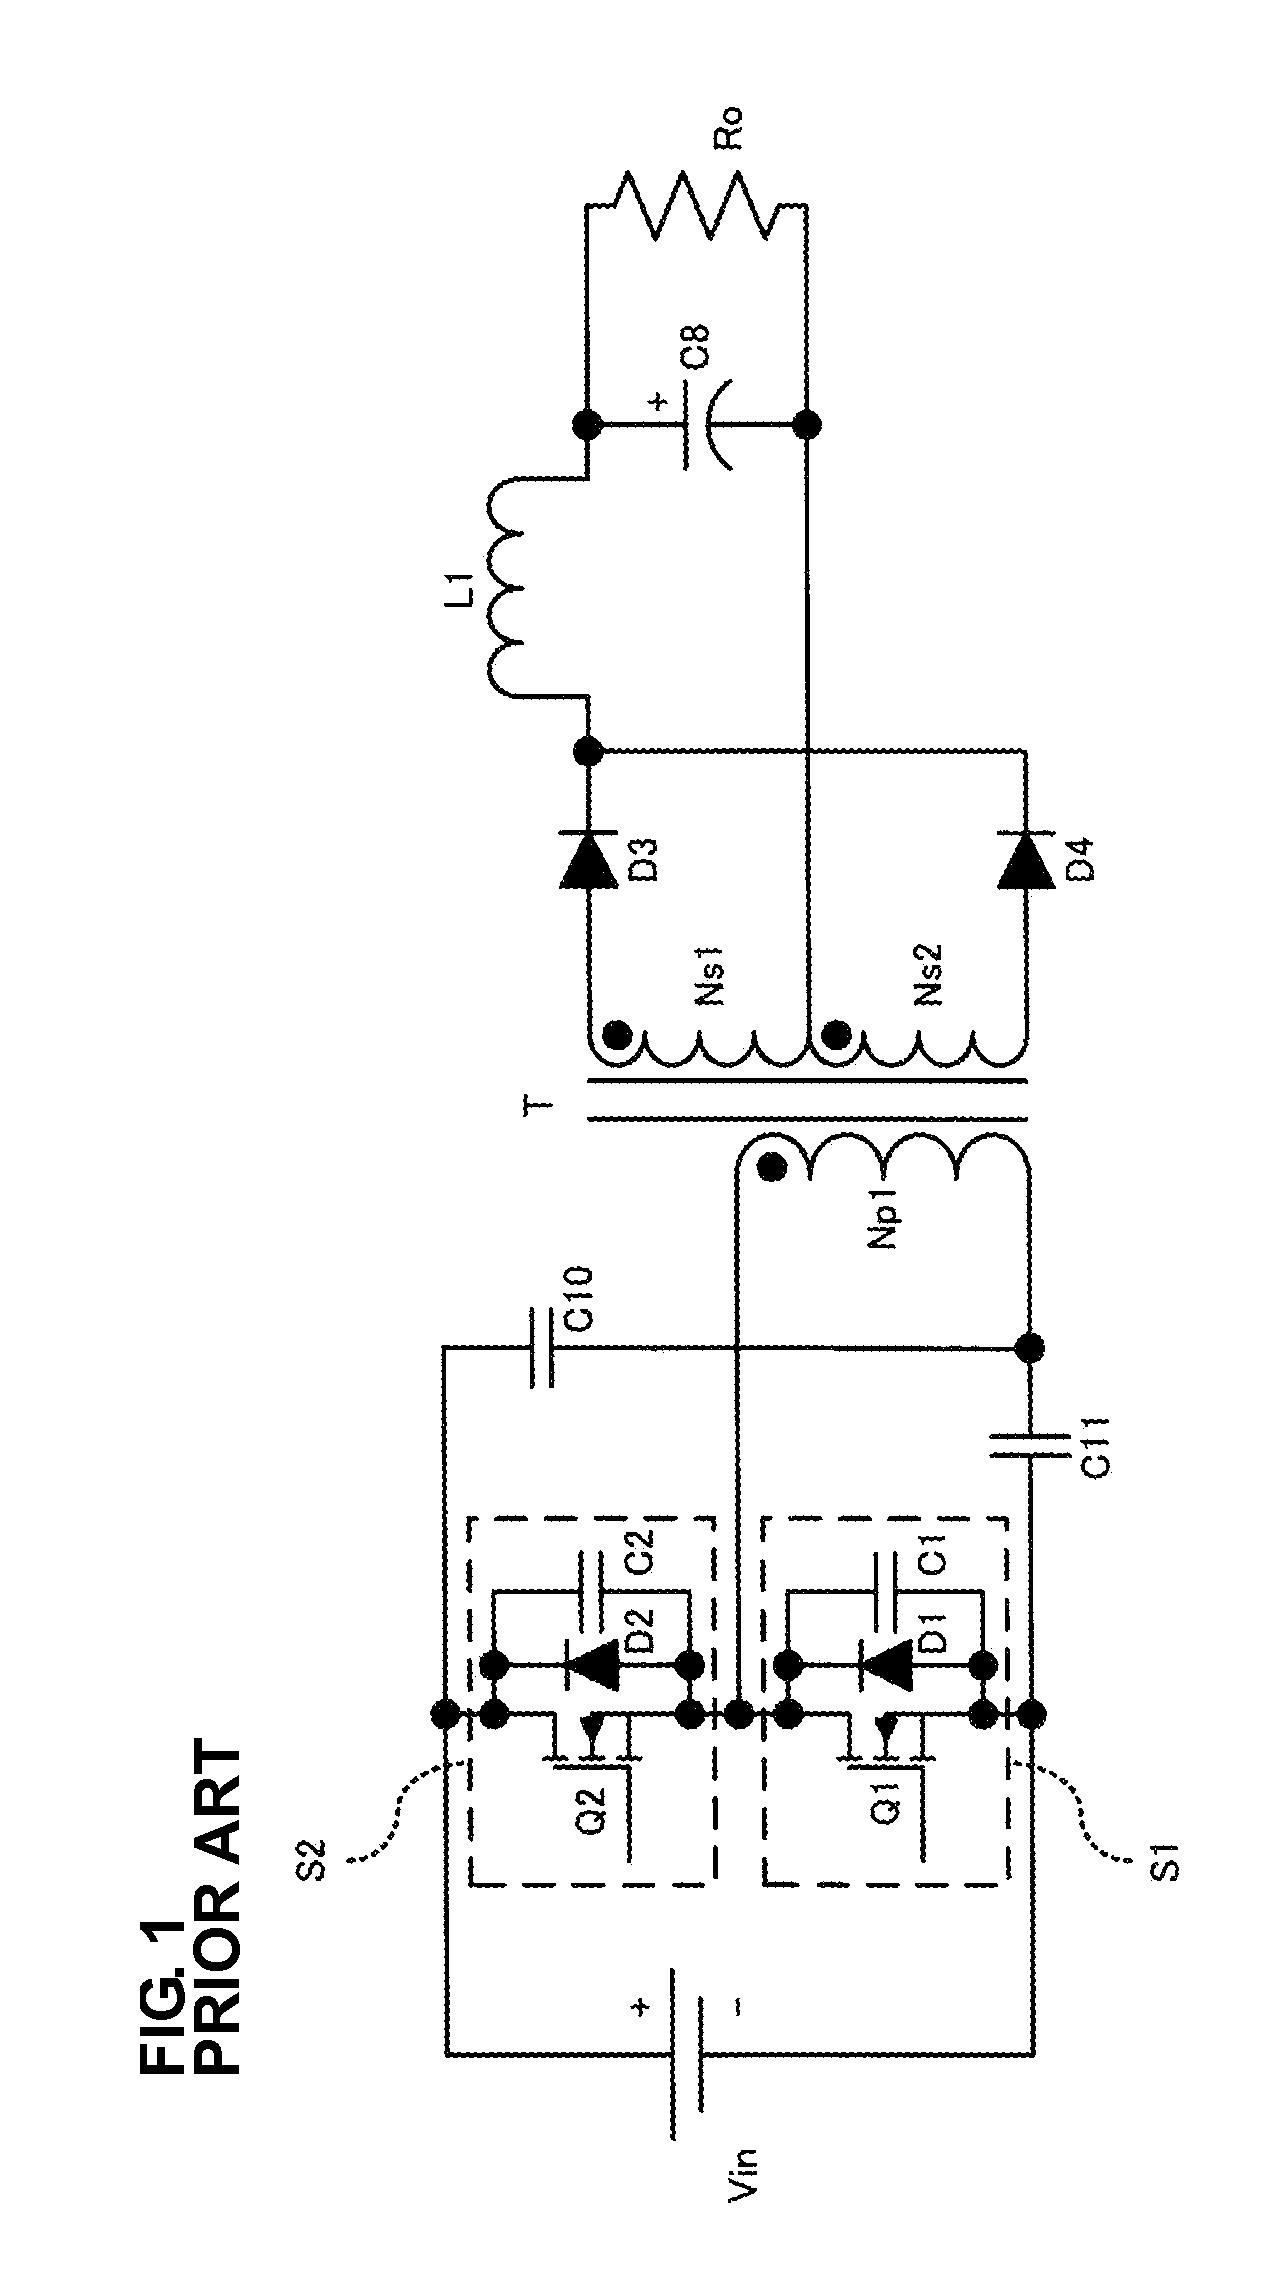 Switching power-supply apparatus